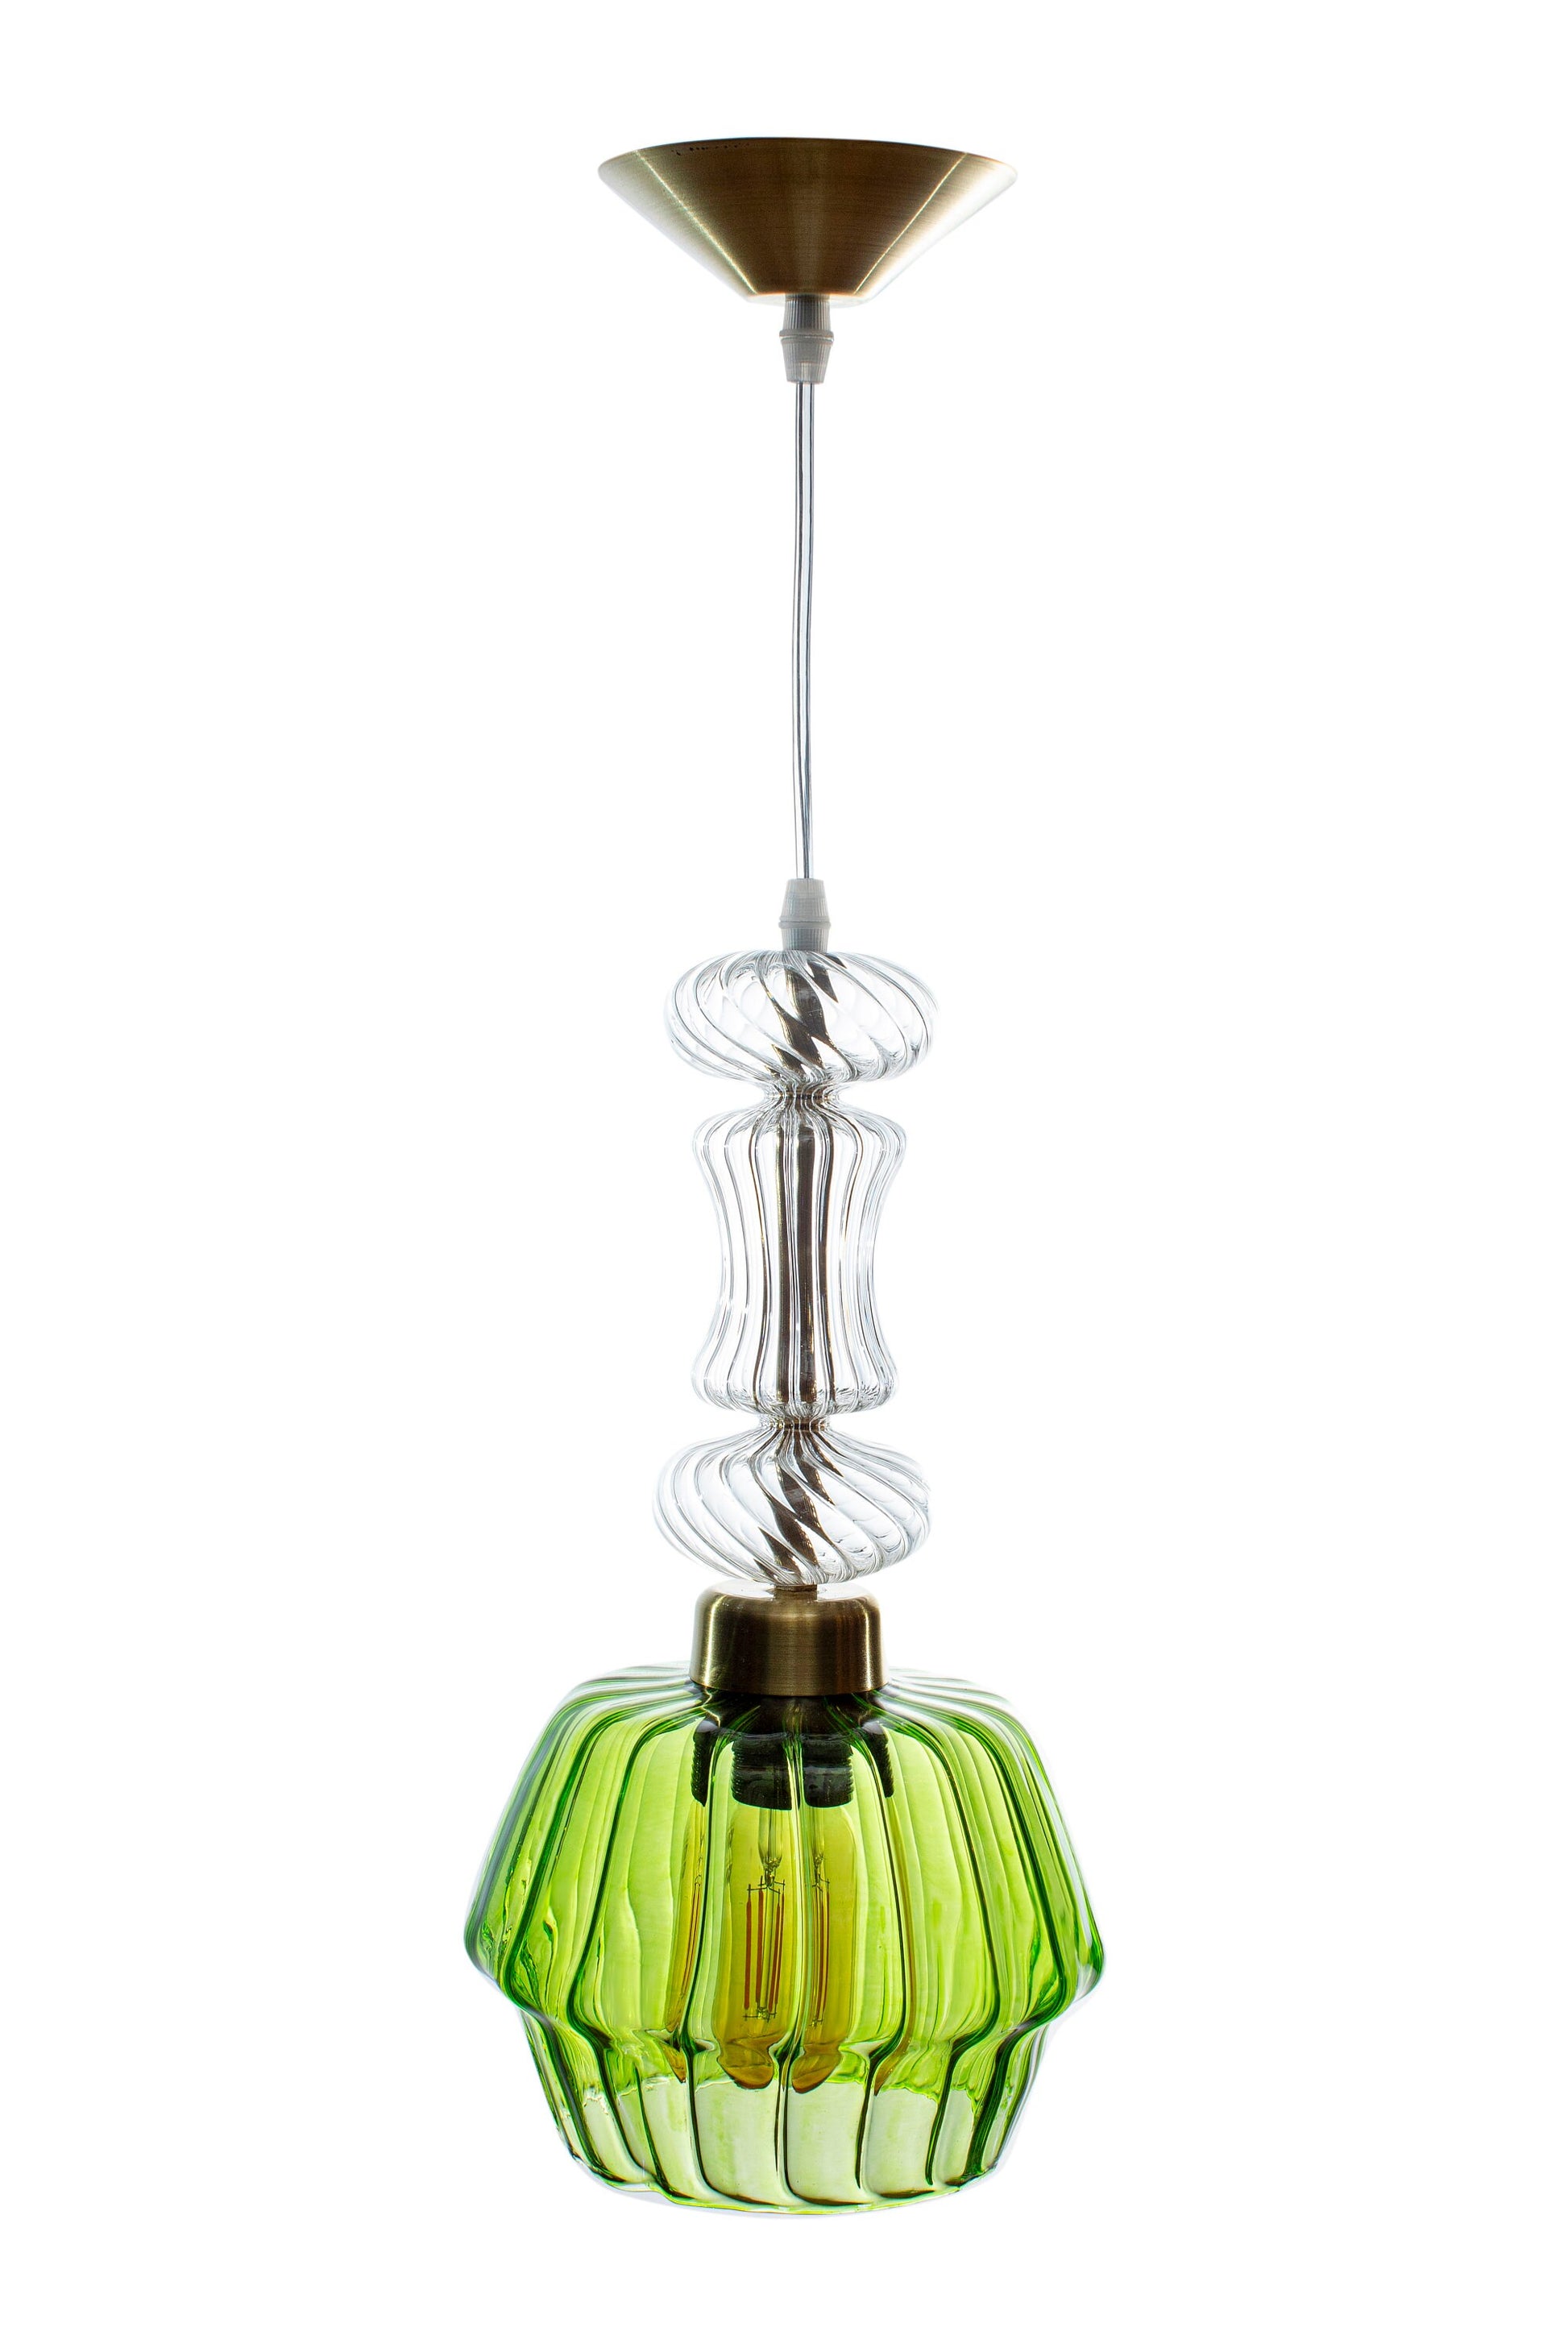 Green and Crystal Hanging Lamp for Dining Room Lights - Les Trois Pyramides